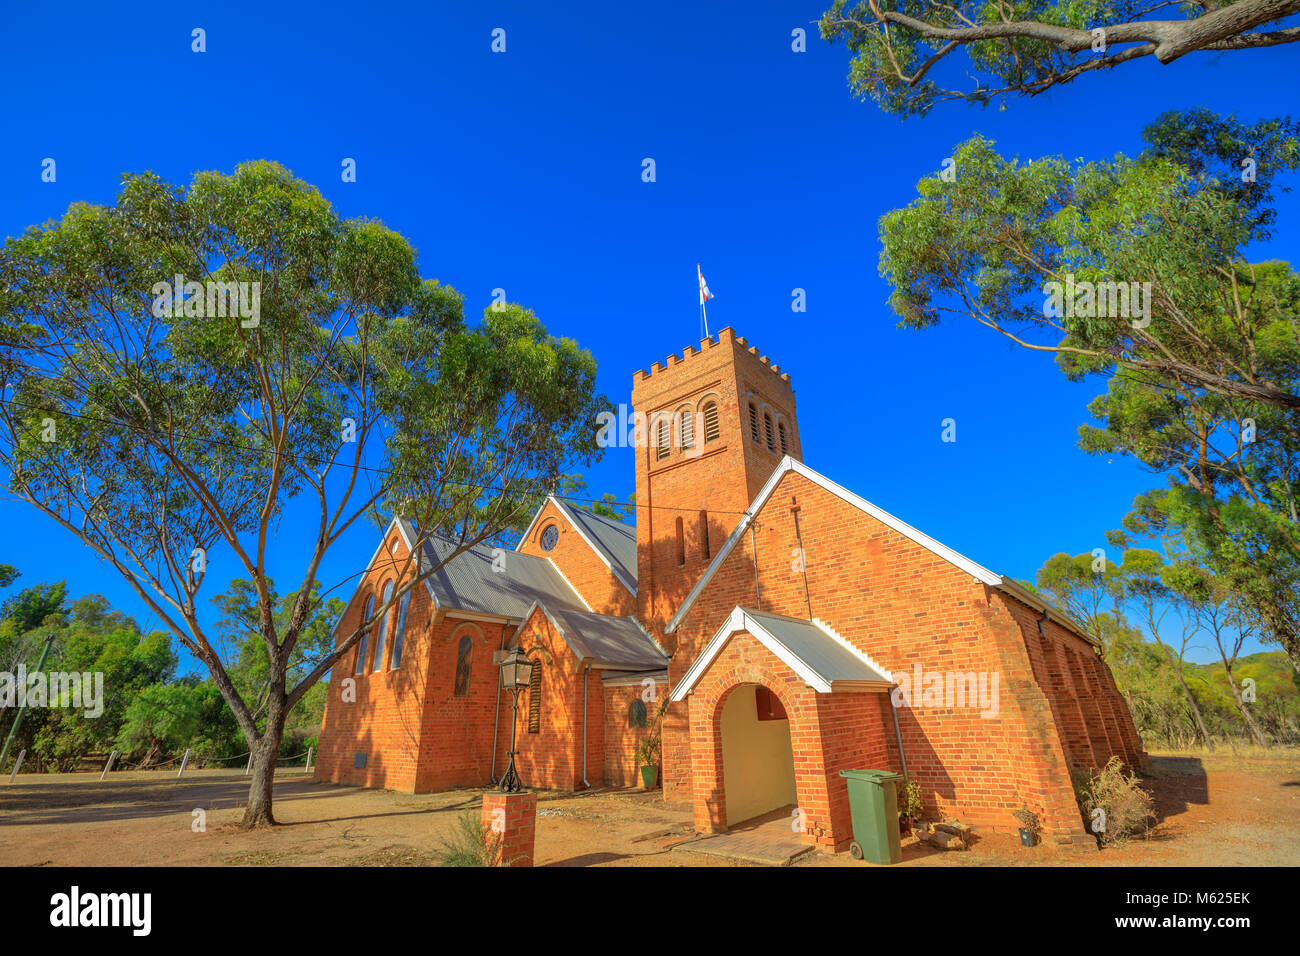 The Anglican Church of the Holy Trinity in Victorian Romanesque style in York, a popular tourist town east of Perth, Avon Valley. York is the oldest and first inland settlement in Western Australia. Stock Photo